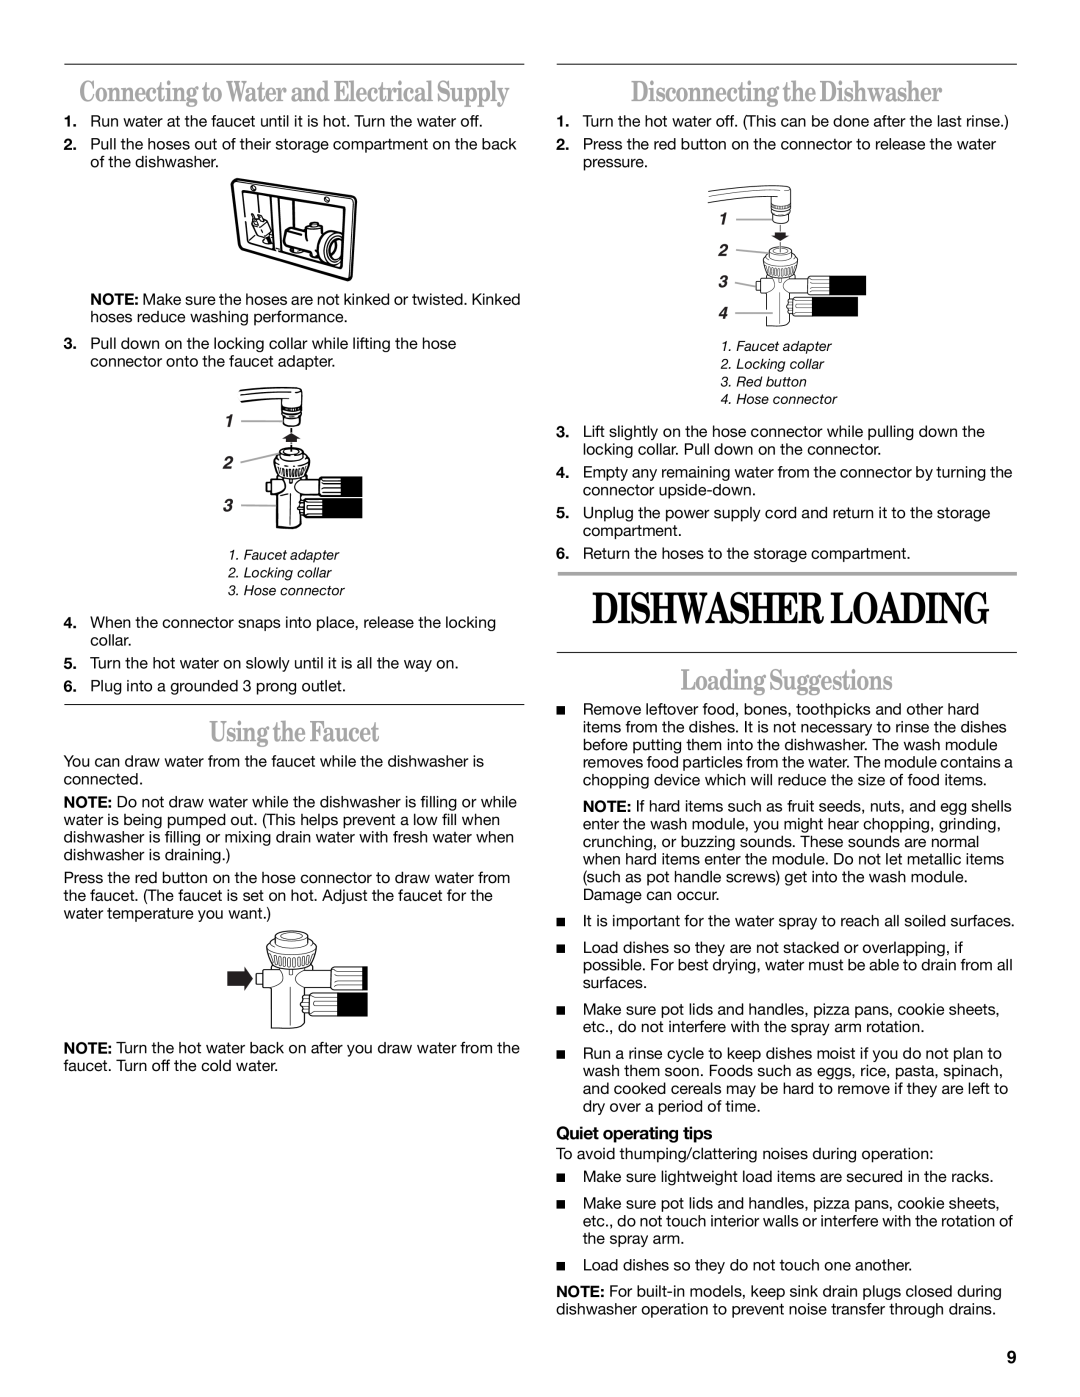 Whirlpool 941, 945 manual Using the Faucet, Disconnecting the Dishwasher, Loading Suggestions, Quiet operating tips 